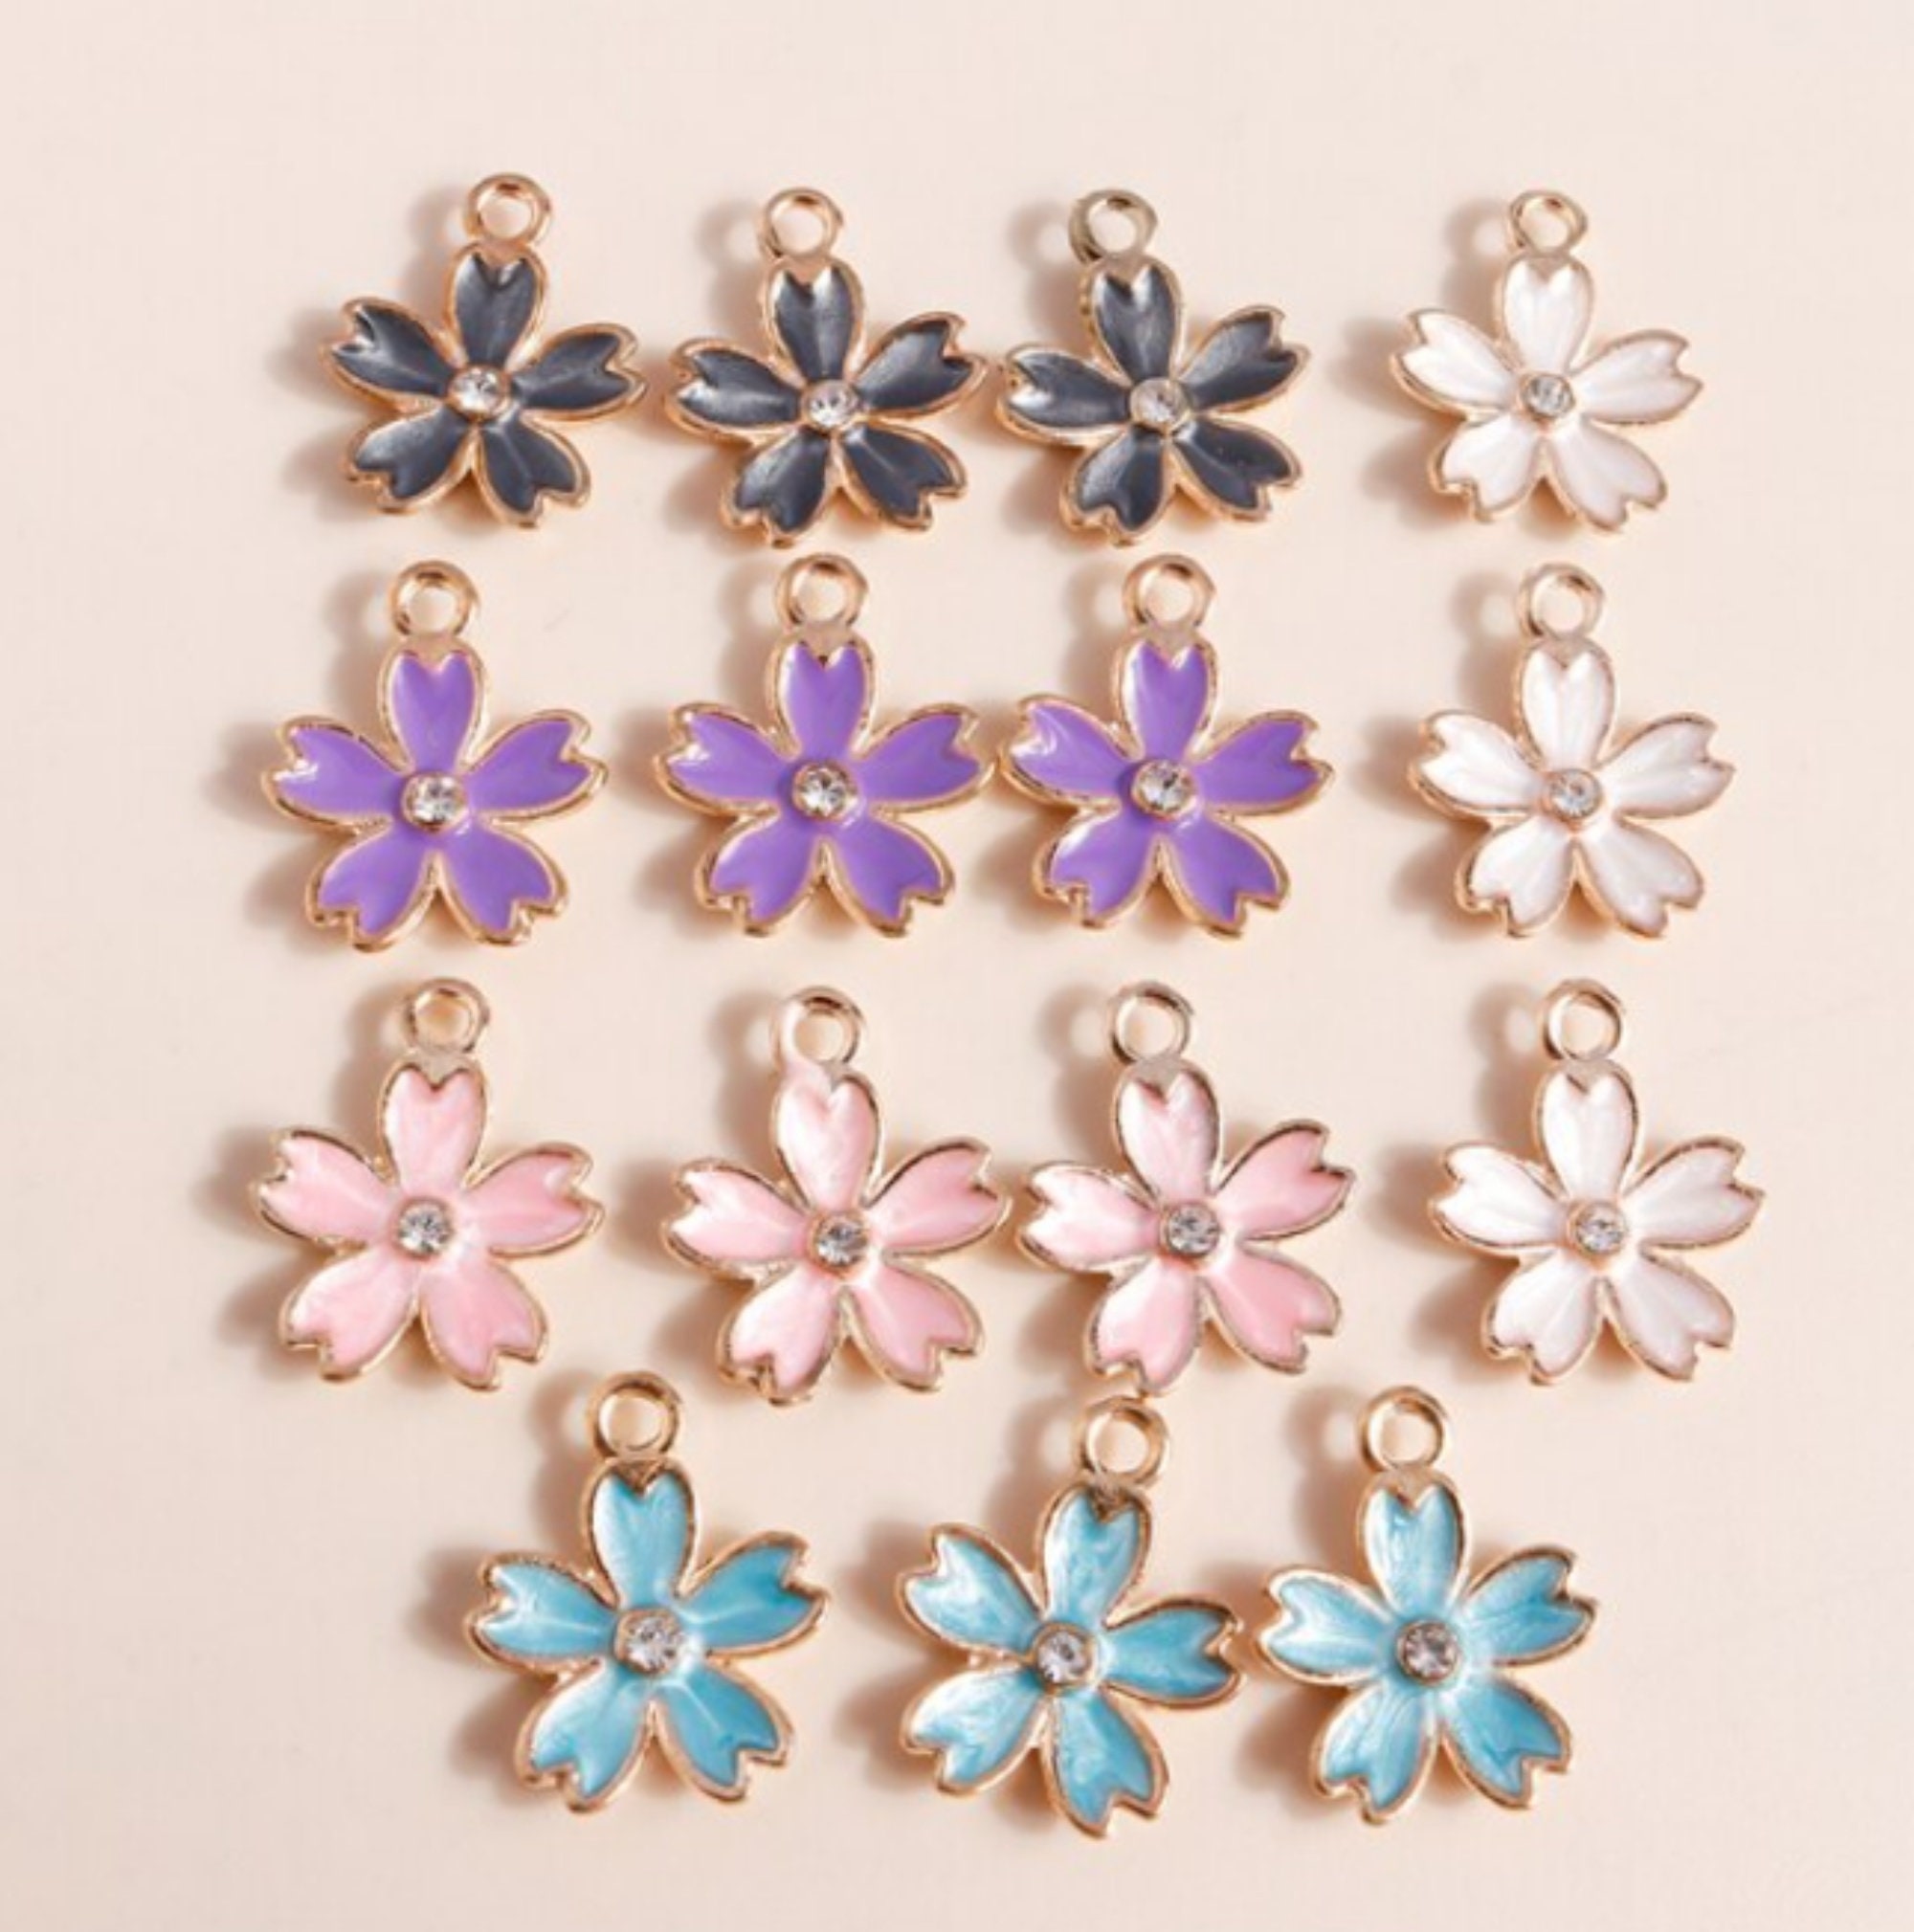 10pcs Enamel Flower Charm for Jewelry Making Supplies Necklace